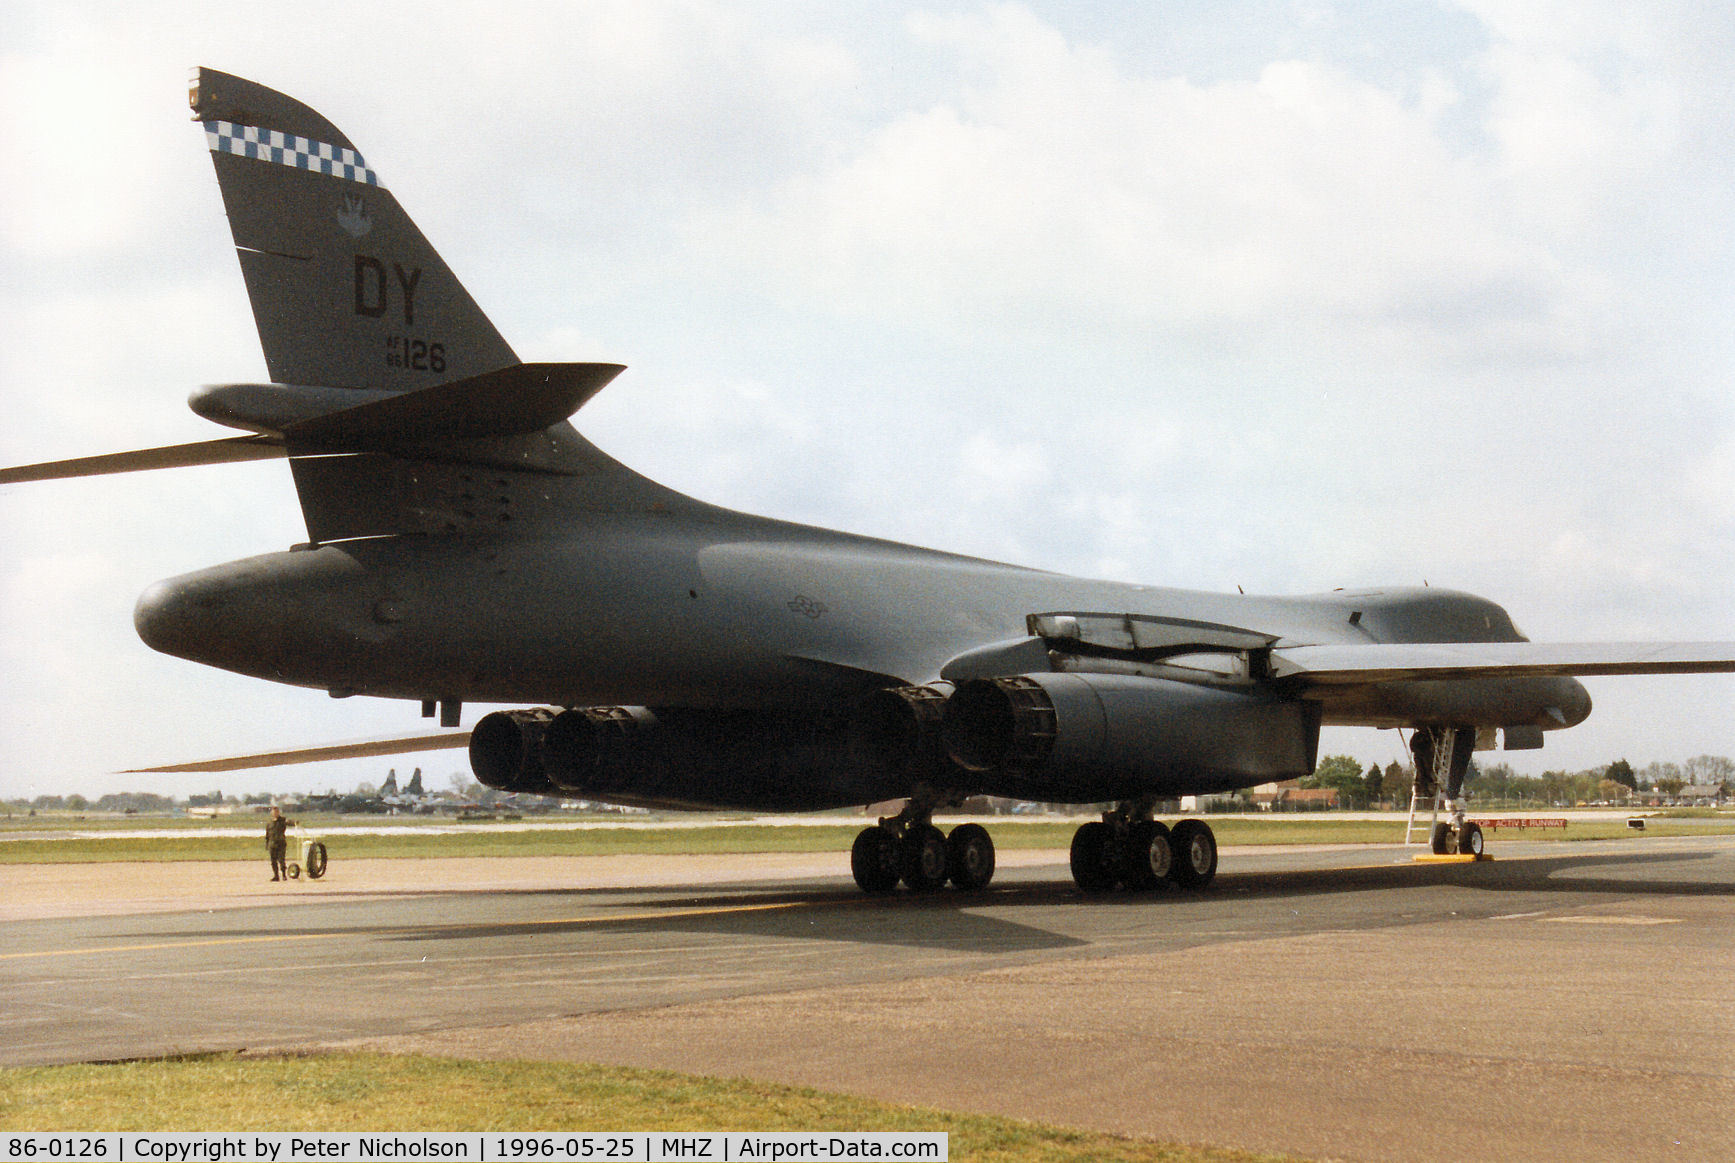 86-0126, 1986 Rockwell B-1B Lancer C/N 86, B-1B Lancer named Hungry Devil of 7th Bombardment Wing's 28th Bomb Squadron on the flight-line at the 1996 RAF Mildenhall Air Fete.